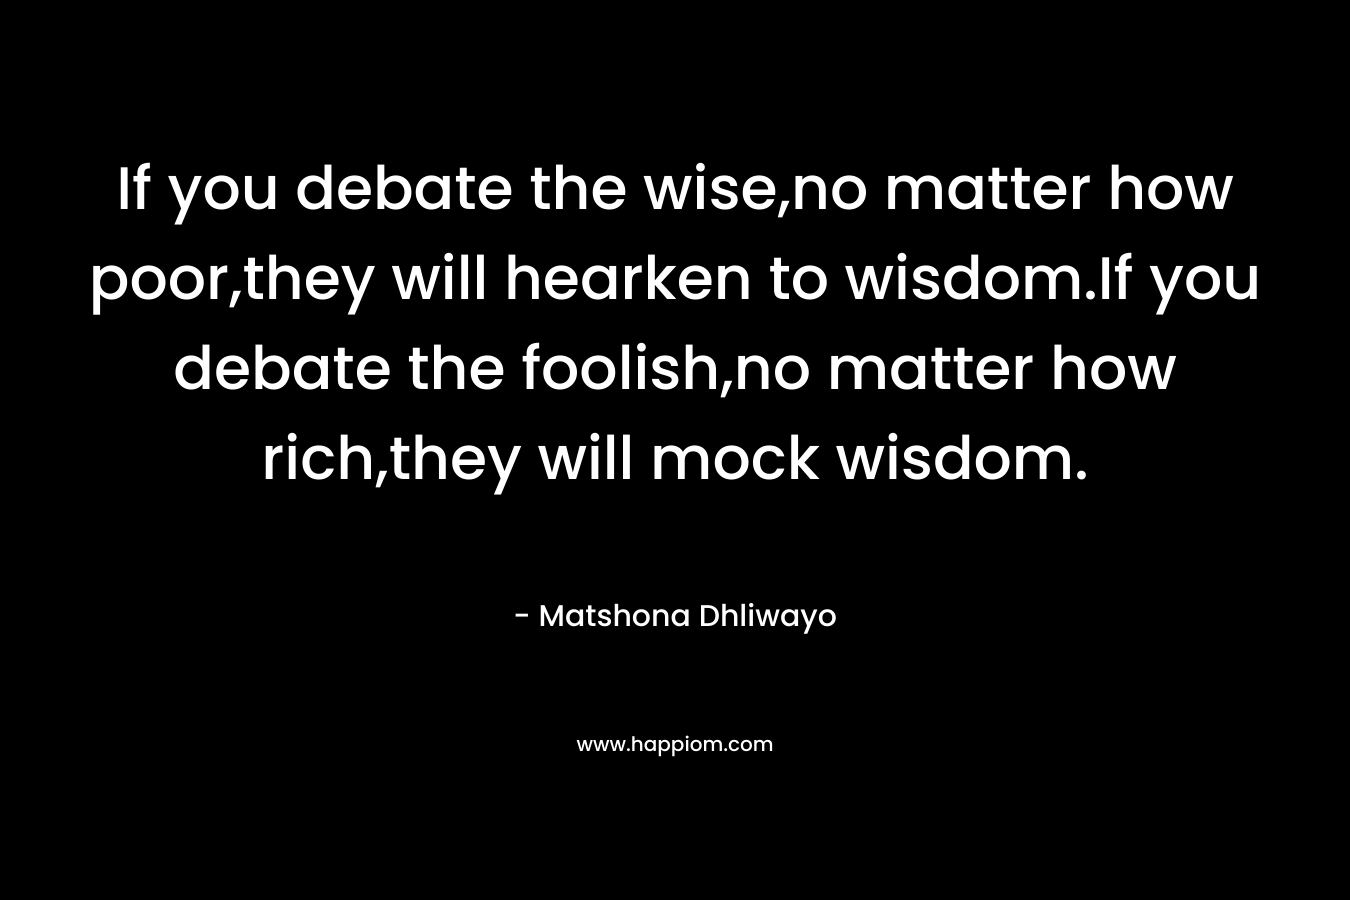 If you debate the wise,no matter how poor,they will hearken to wisdom.If you debate the foolish,no matter how rich,they will mock wisdom.